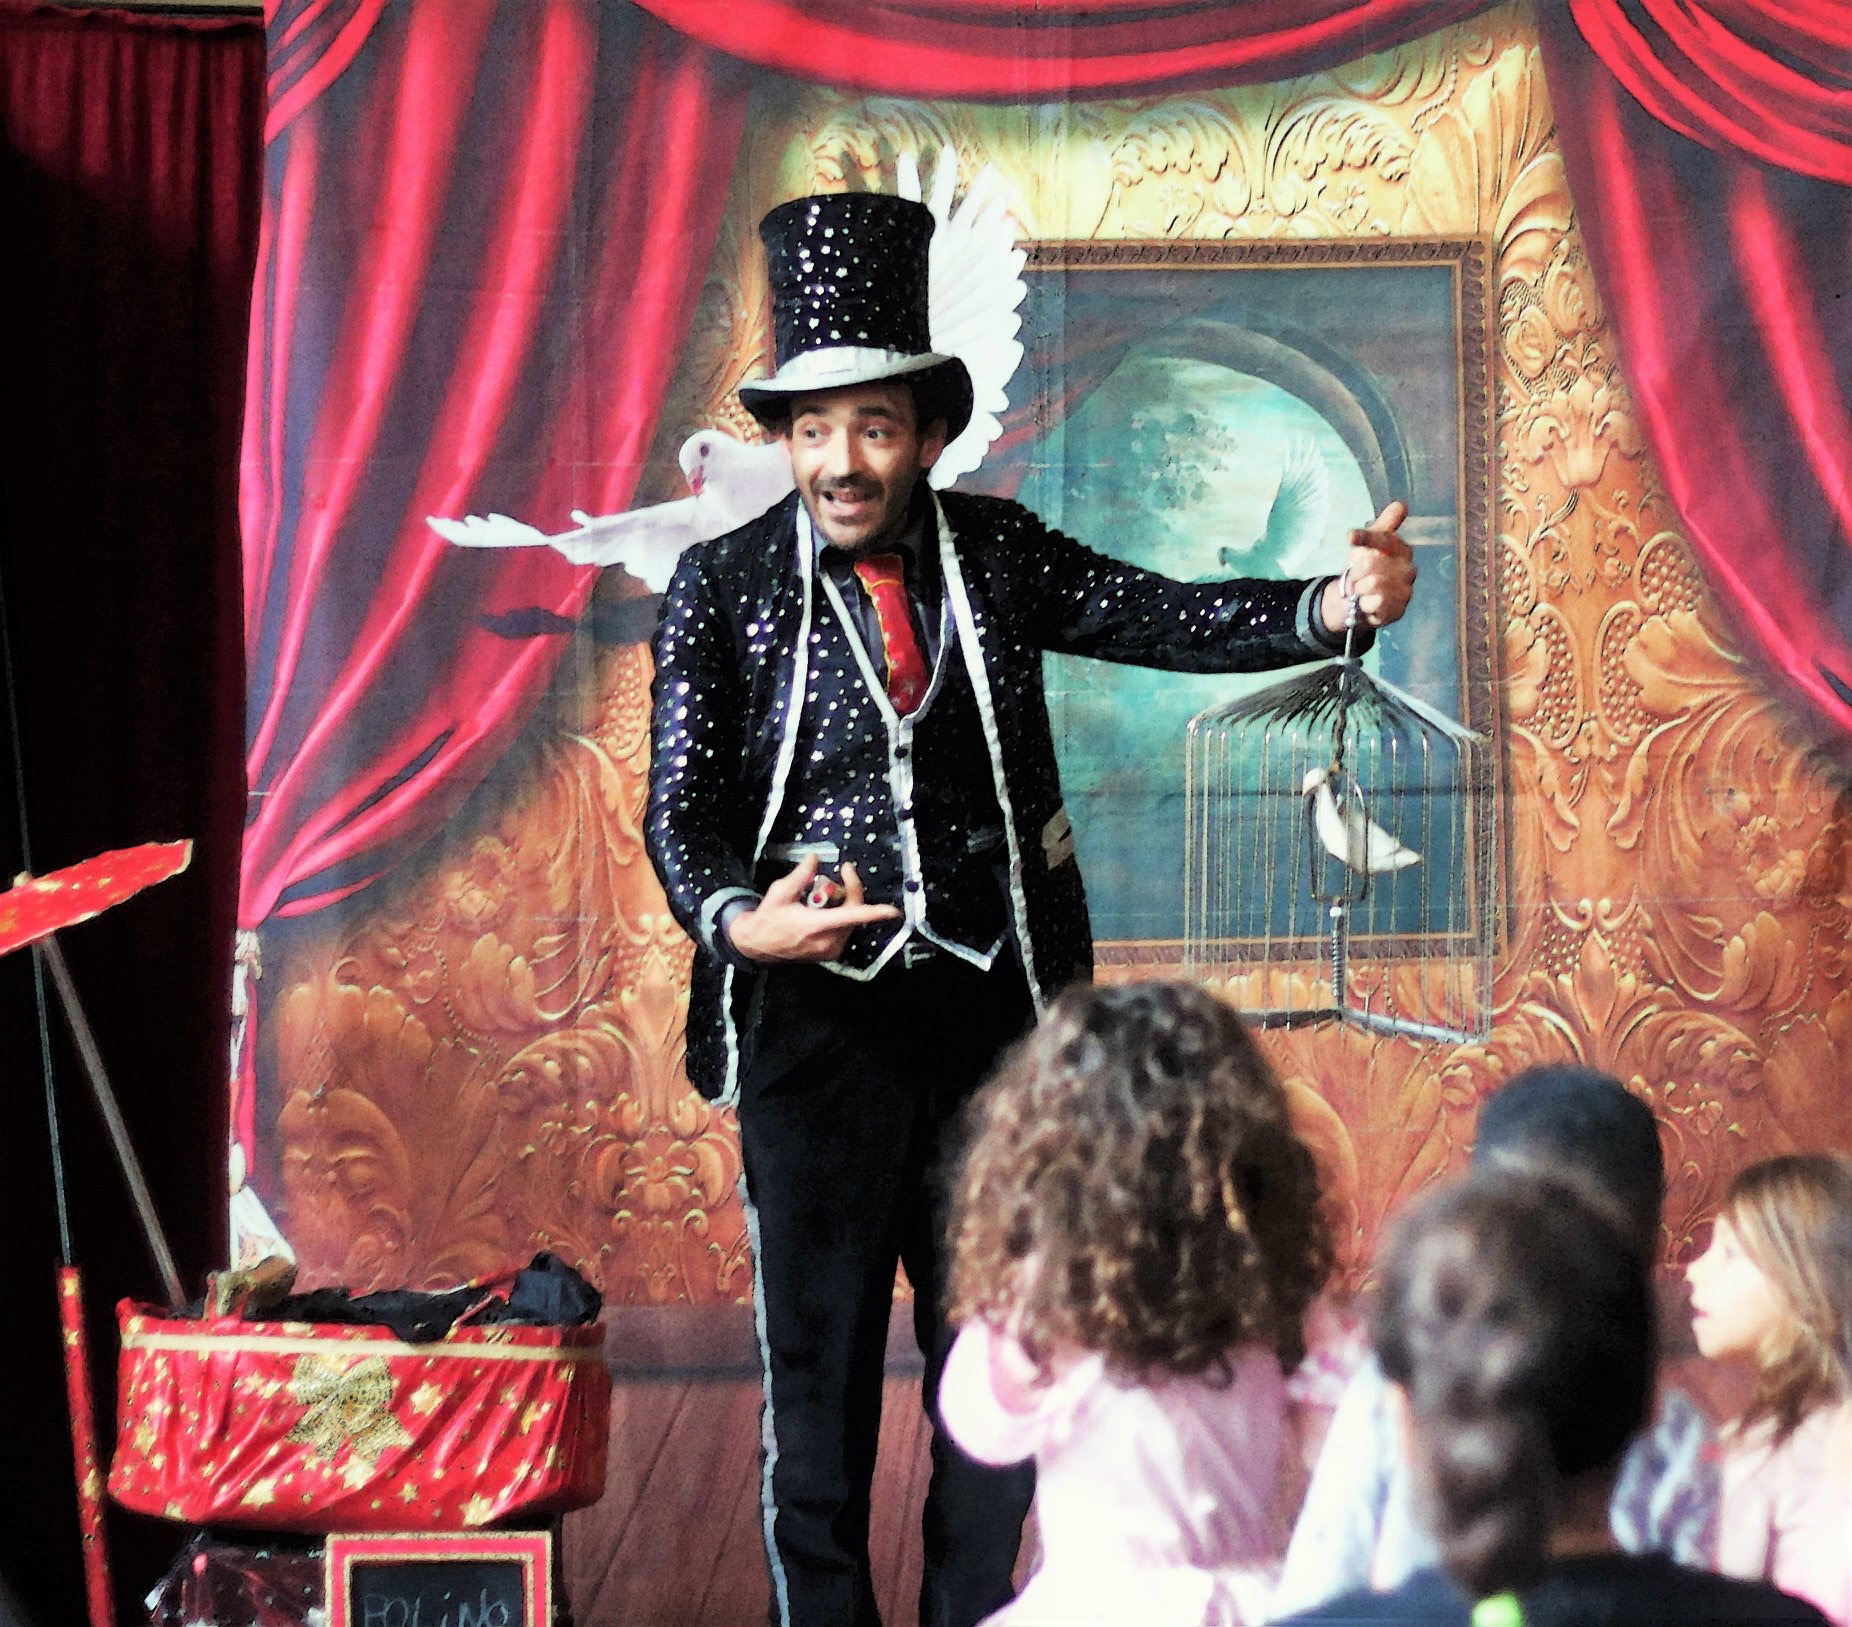 Magiciens, animations d’illusion, shows spectaculaires